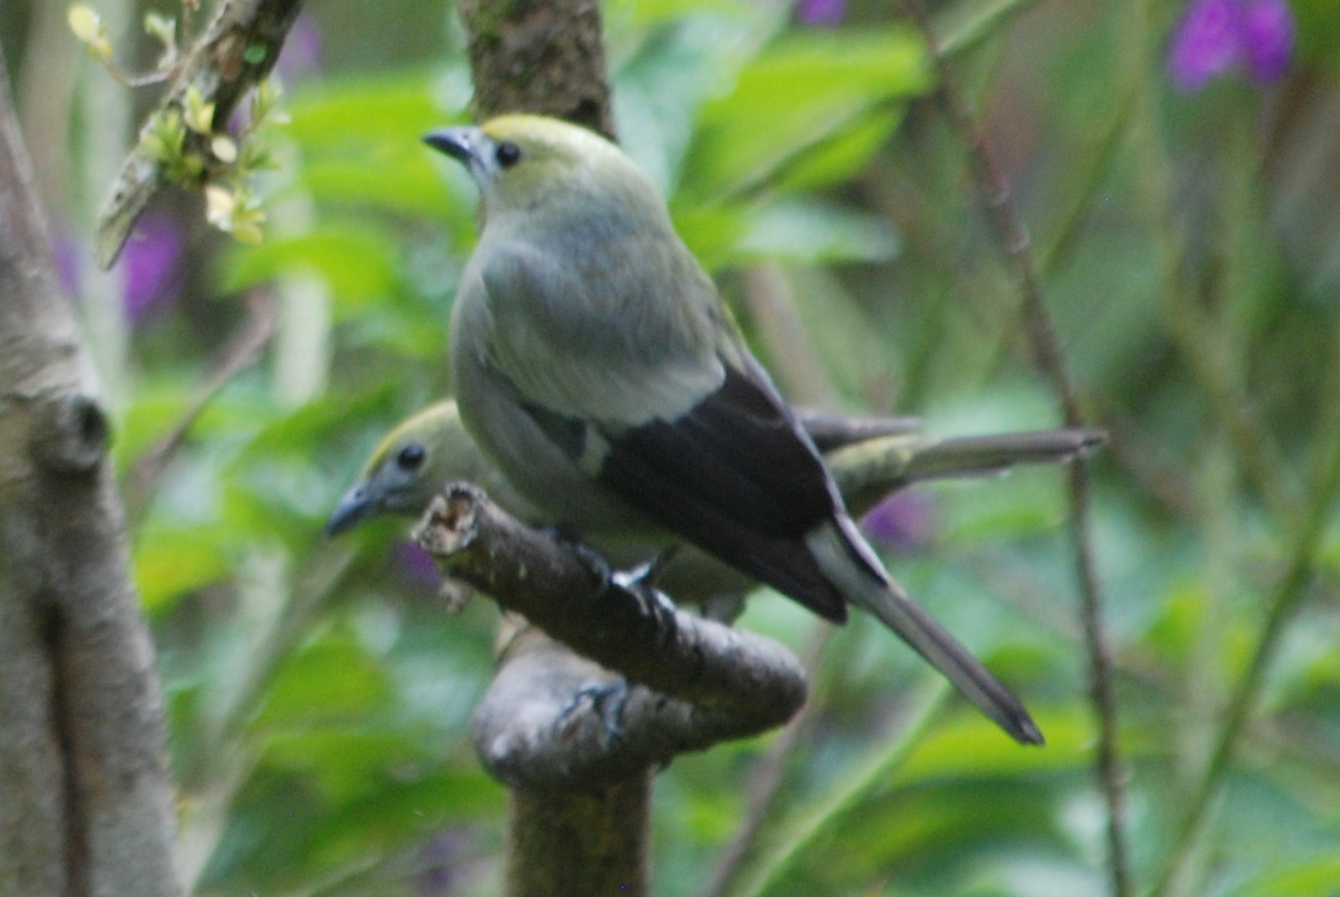 Click picture to see more Palm Tanagers.